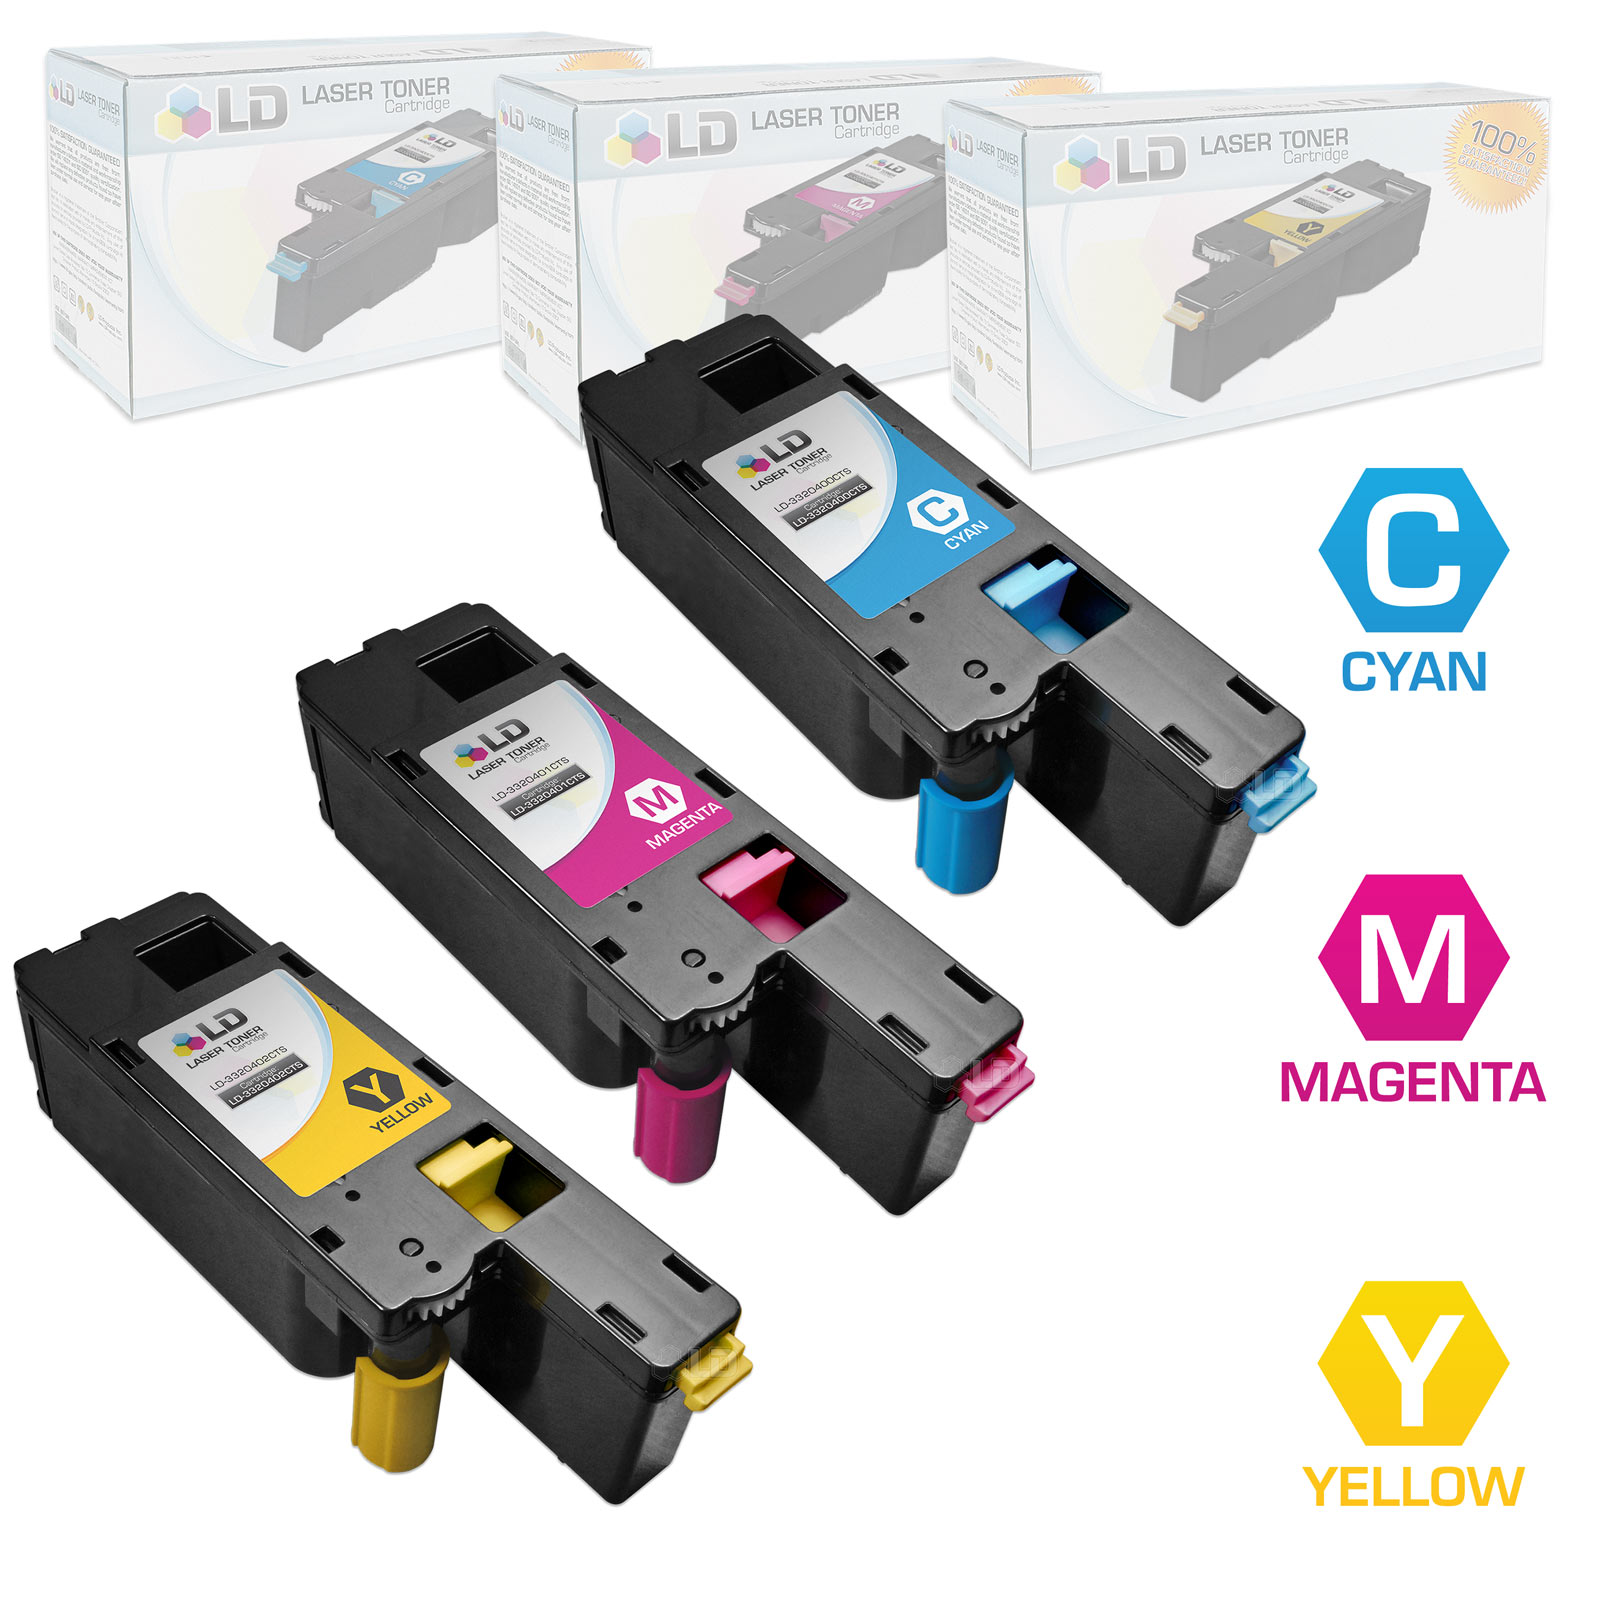 LD Compatible Replacements for Dell Color Laser C1660w Set of 3 Laser Toner Cartridges Includes: 1 332-0400 Cyan, 1 332-0401 Magenta, and 1 332-0402 Yellow - image 1 of 1